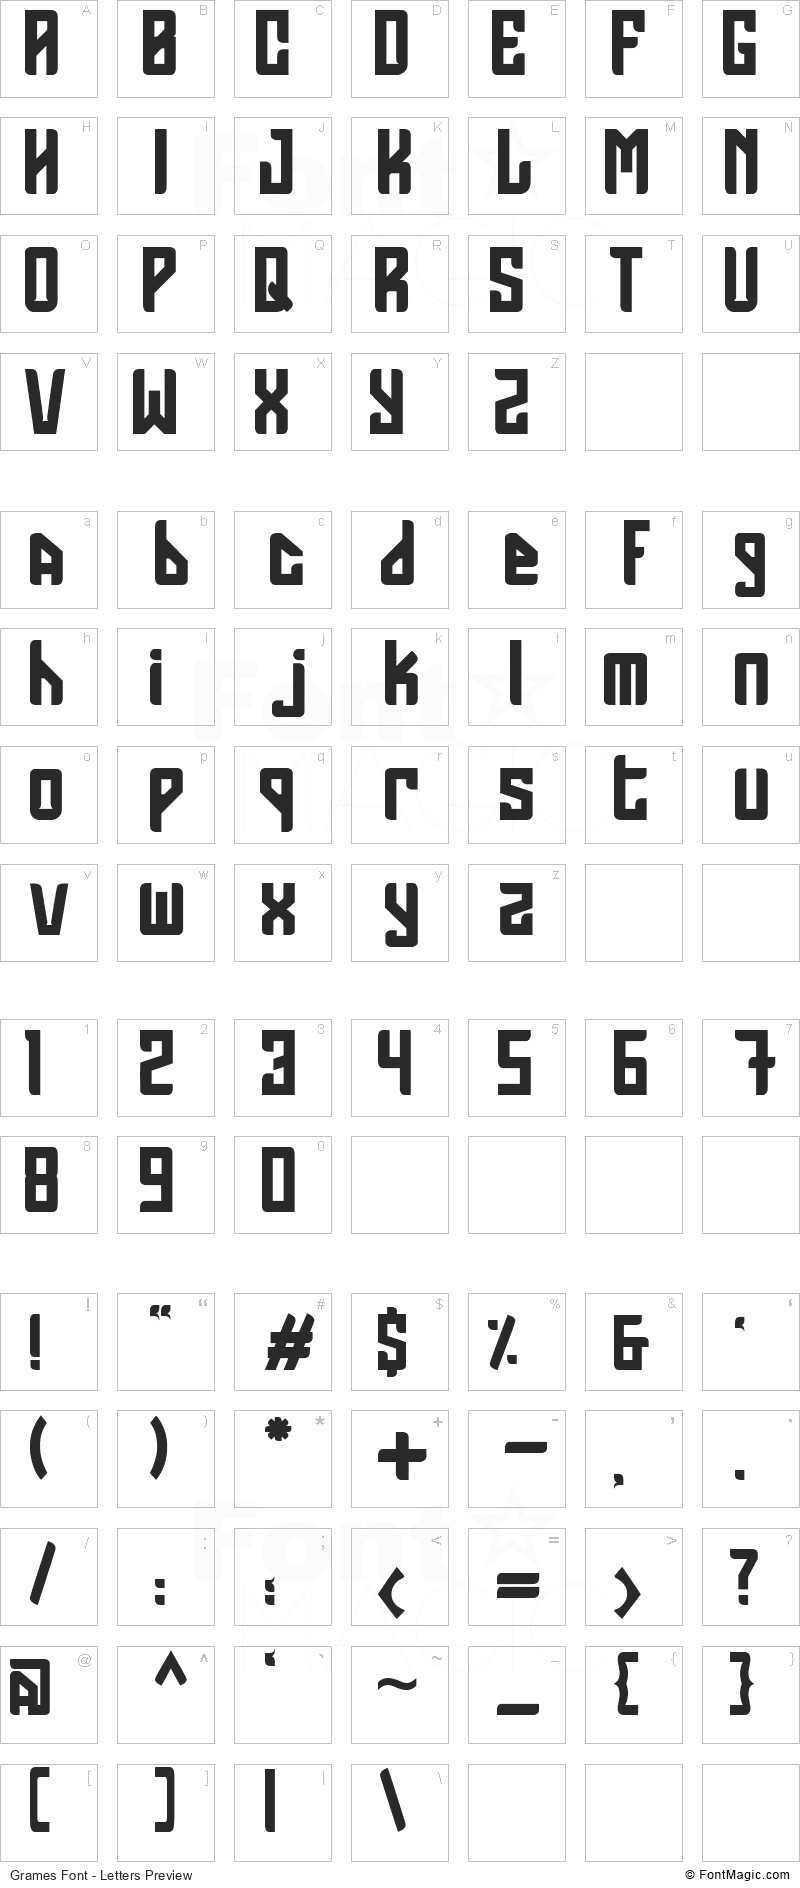 Grames Font - All Latters Preview Chart